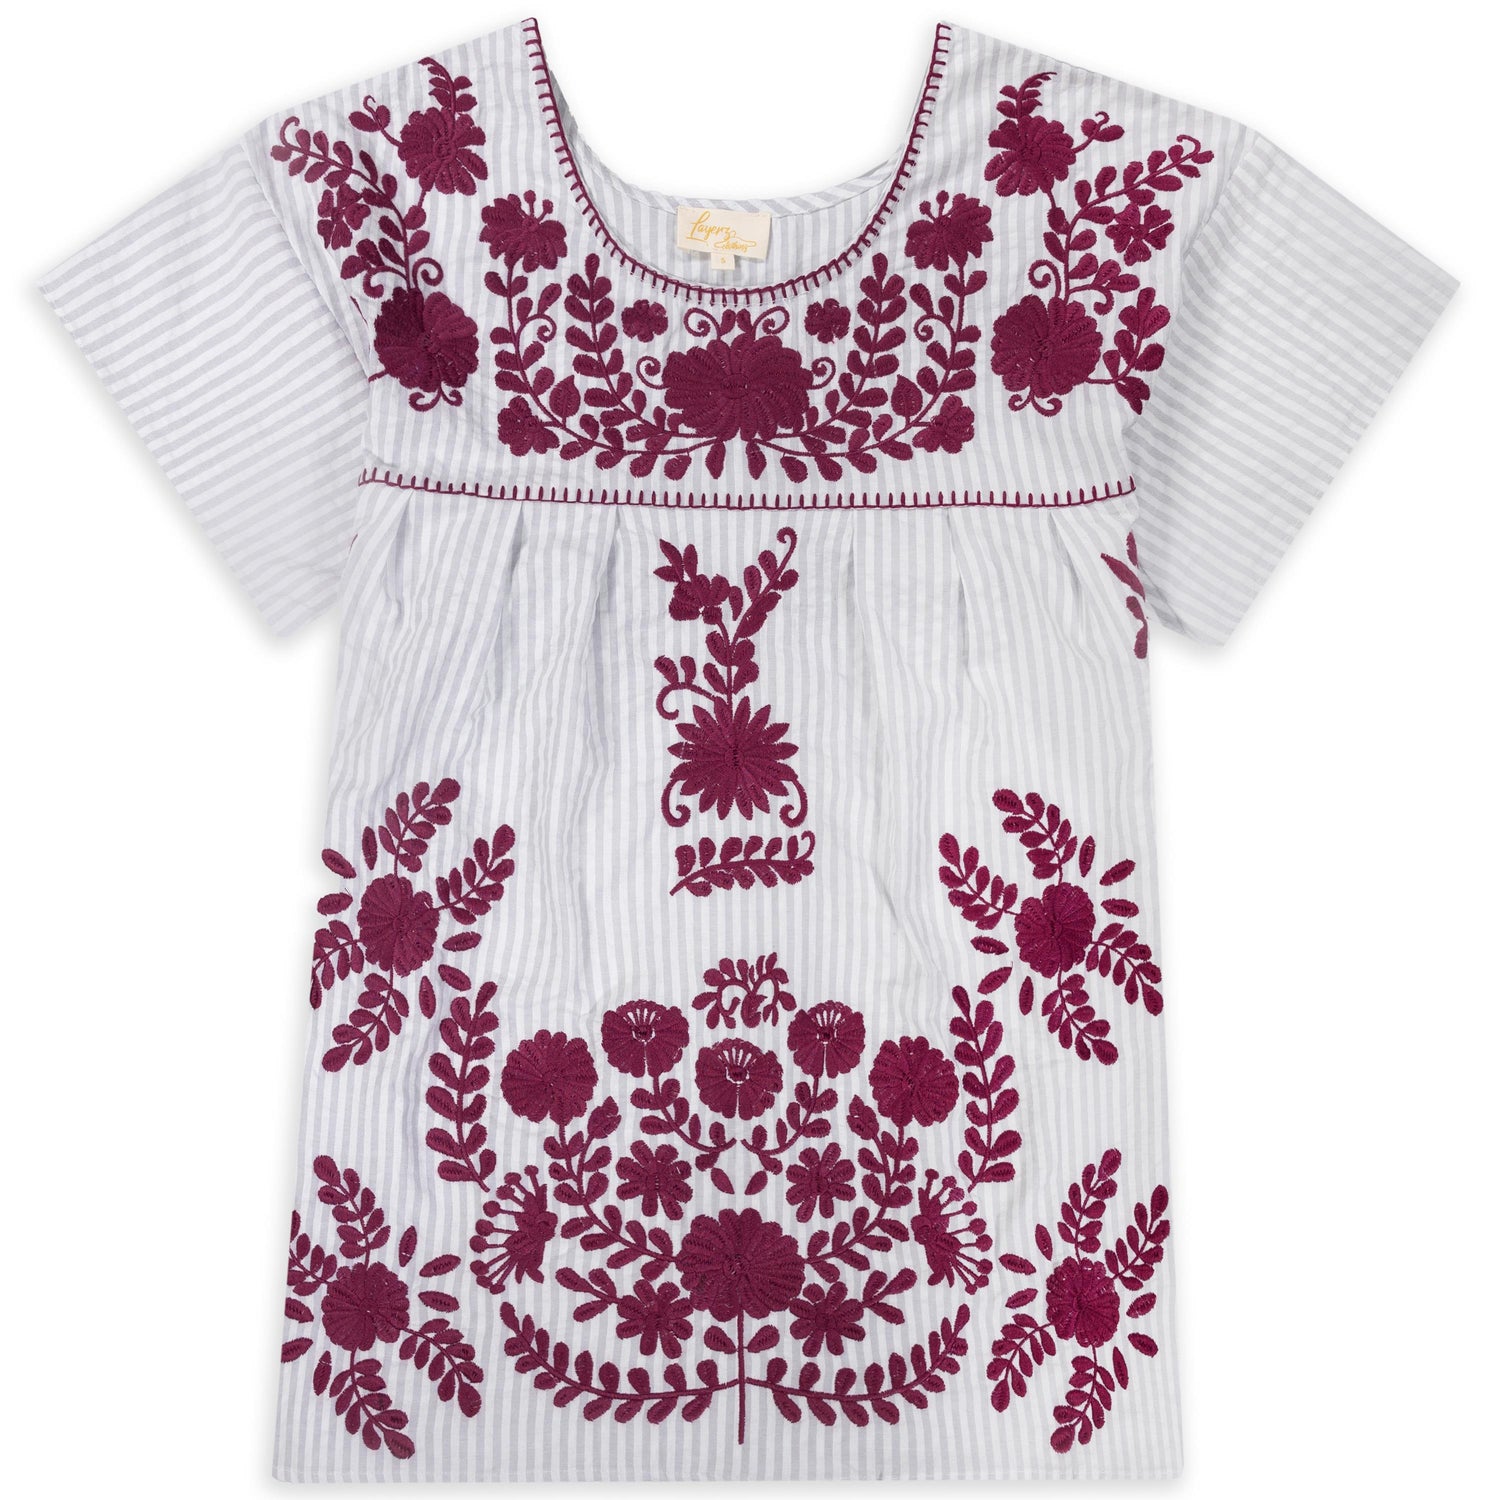 Layerz White Stripe and Maroon Floral Embroidery Top